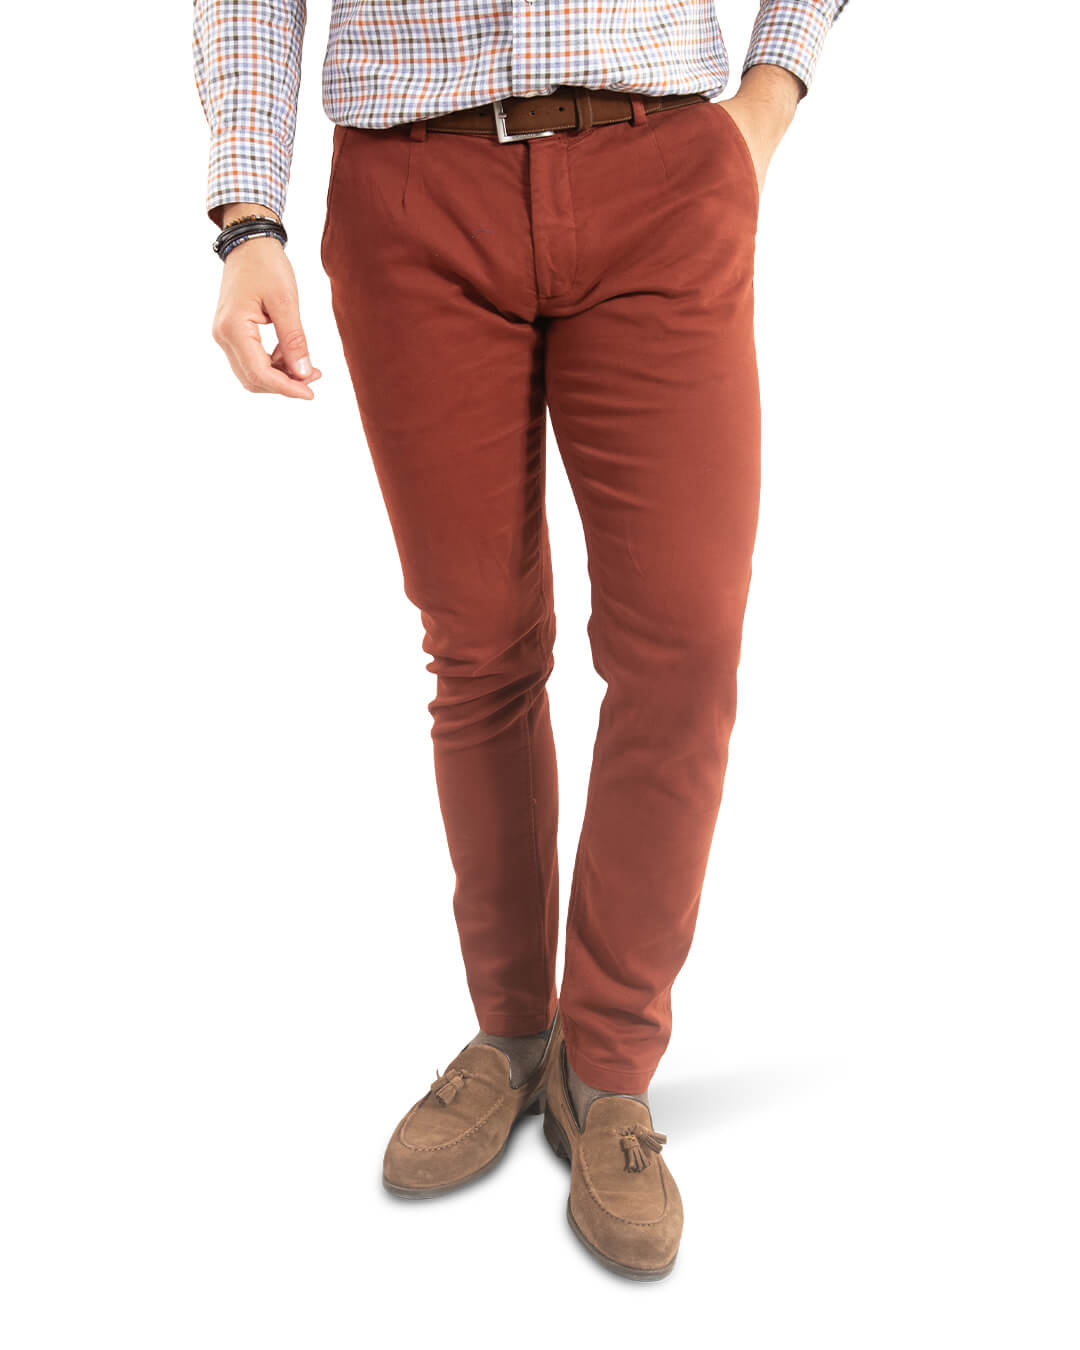 Rust Twill Garment Dyed Chino Trousers